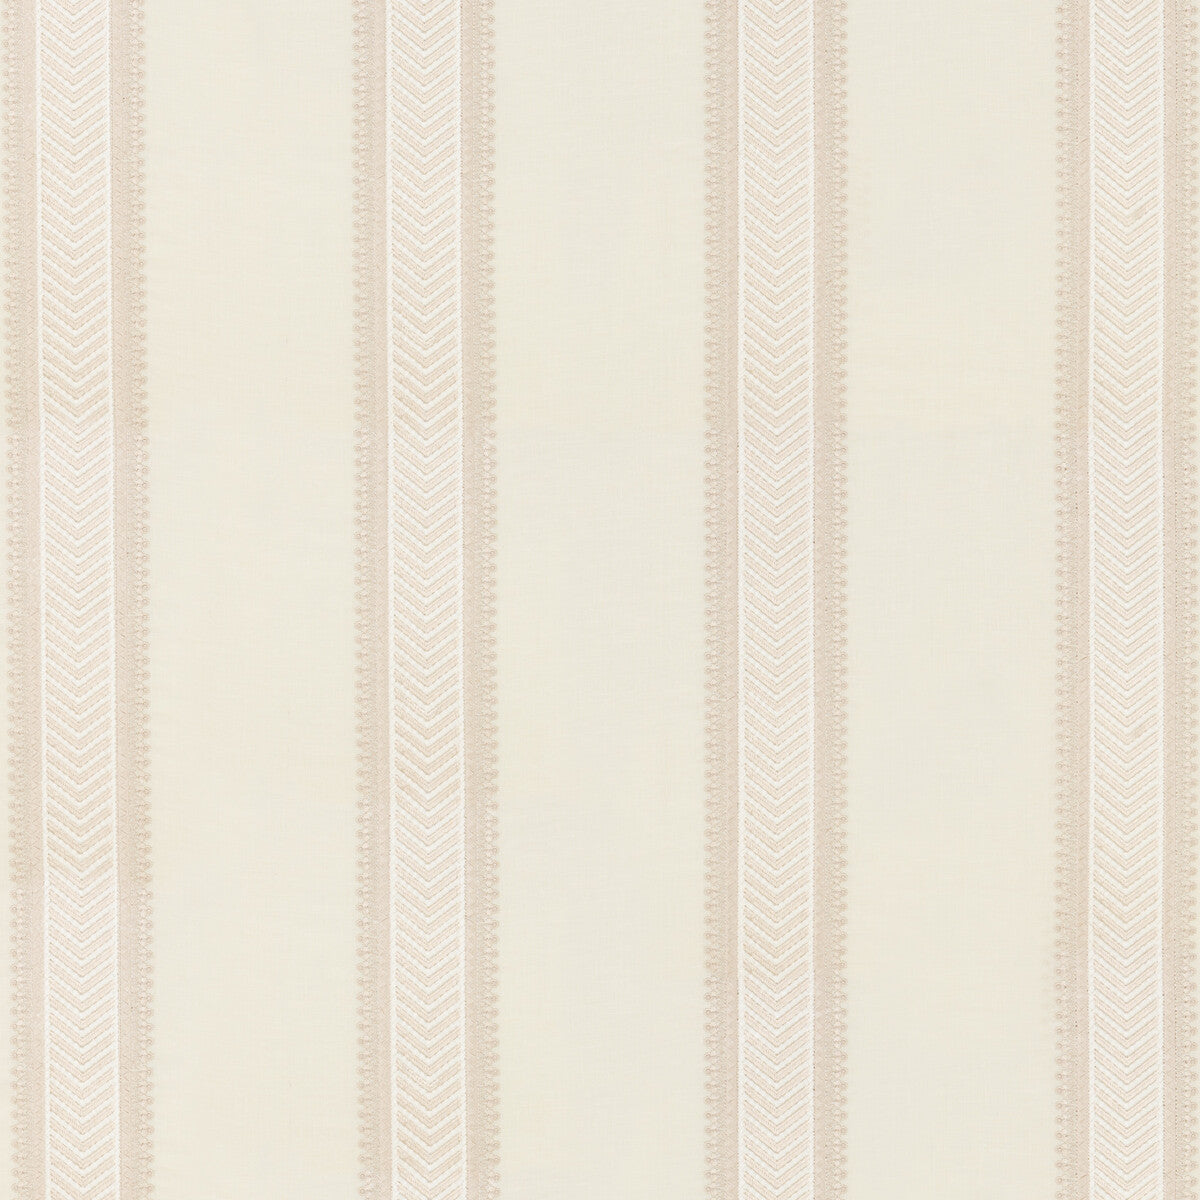 Kerris Stripe fabric in ivory/stone color - pattern BF10799.1.0 - by G P &amp; J Baker in the Artisan II collection